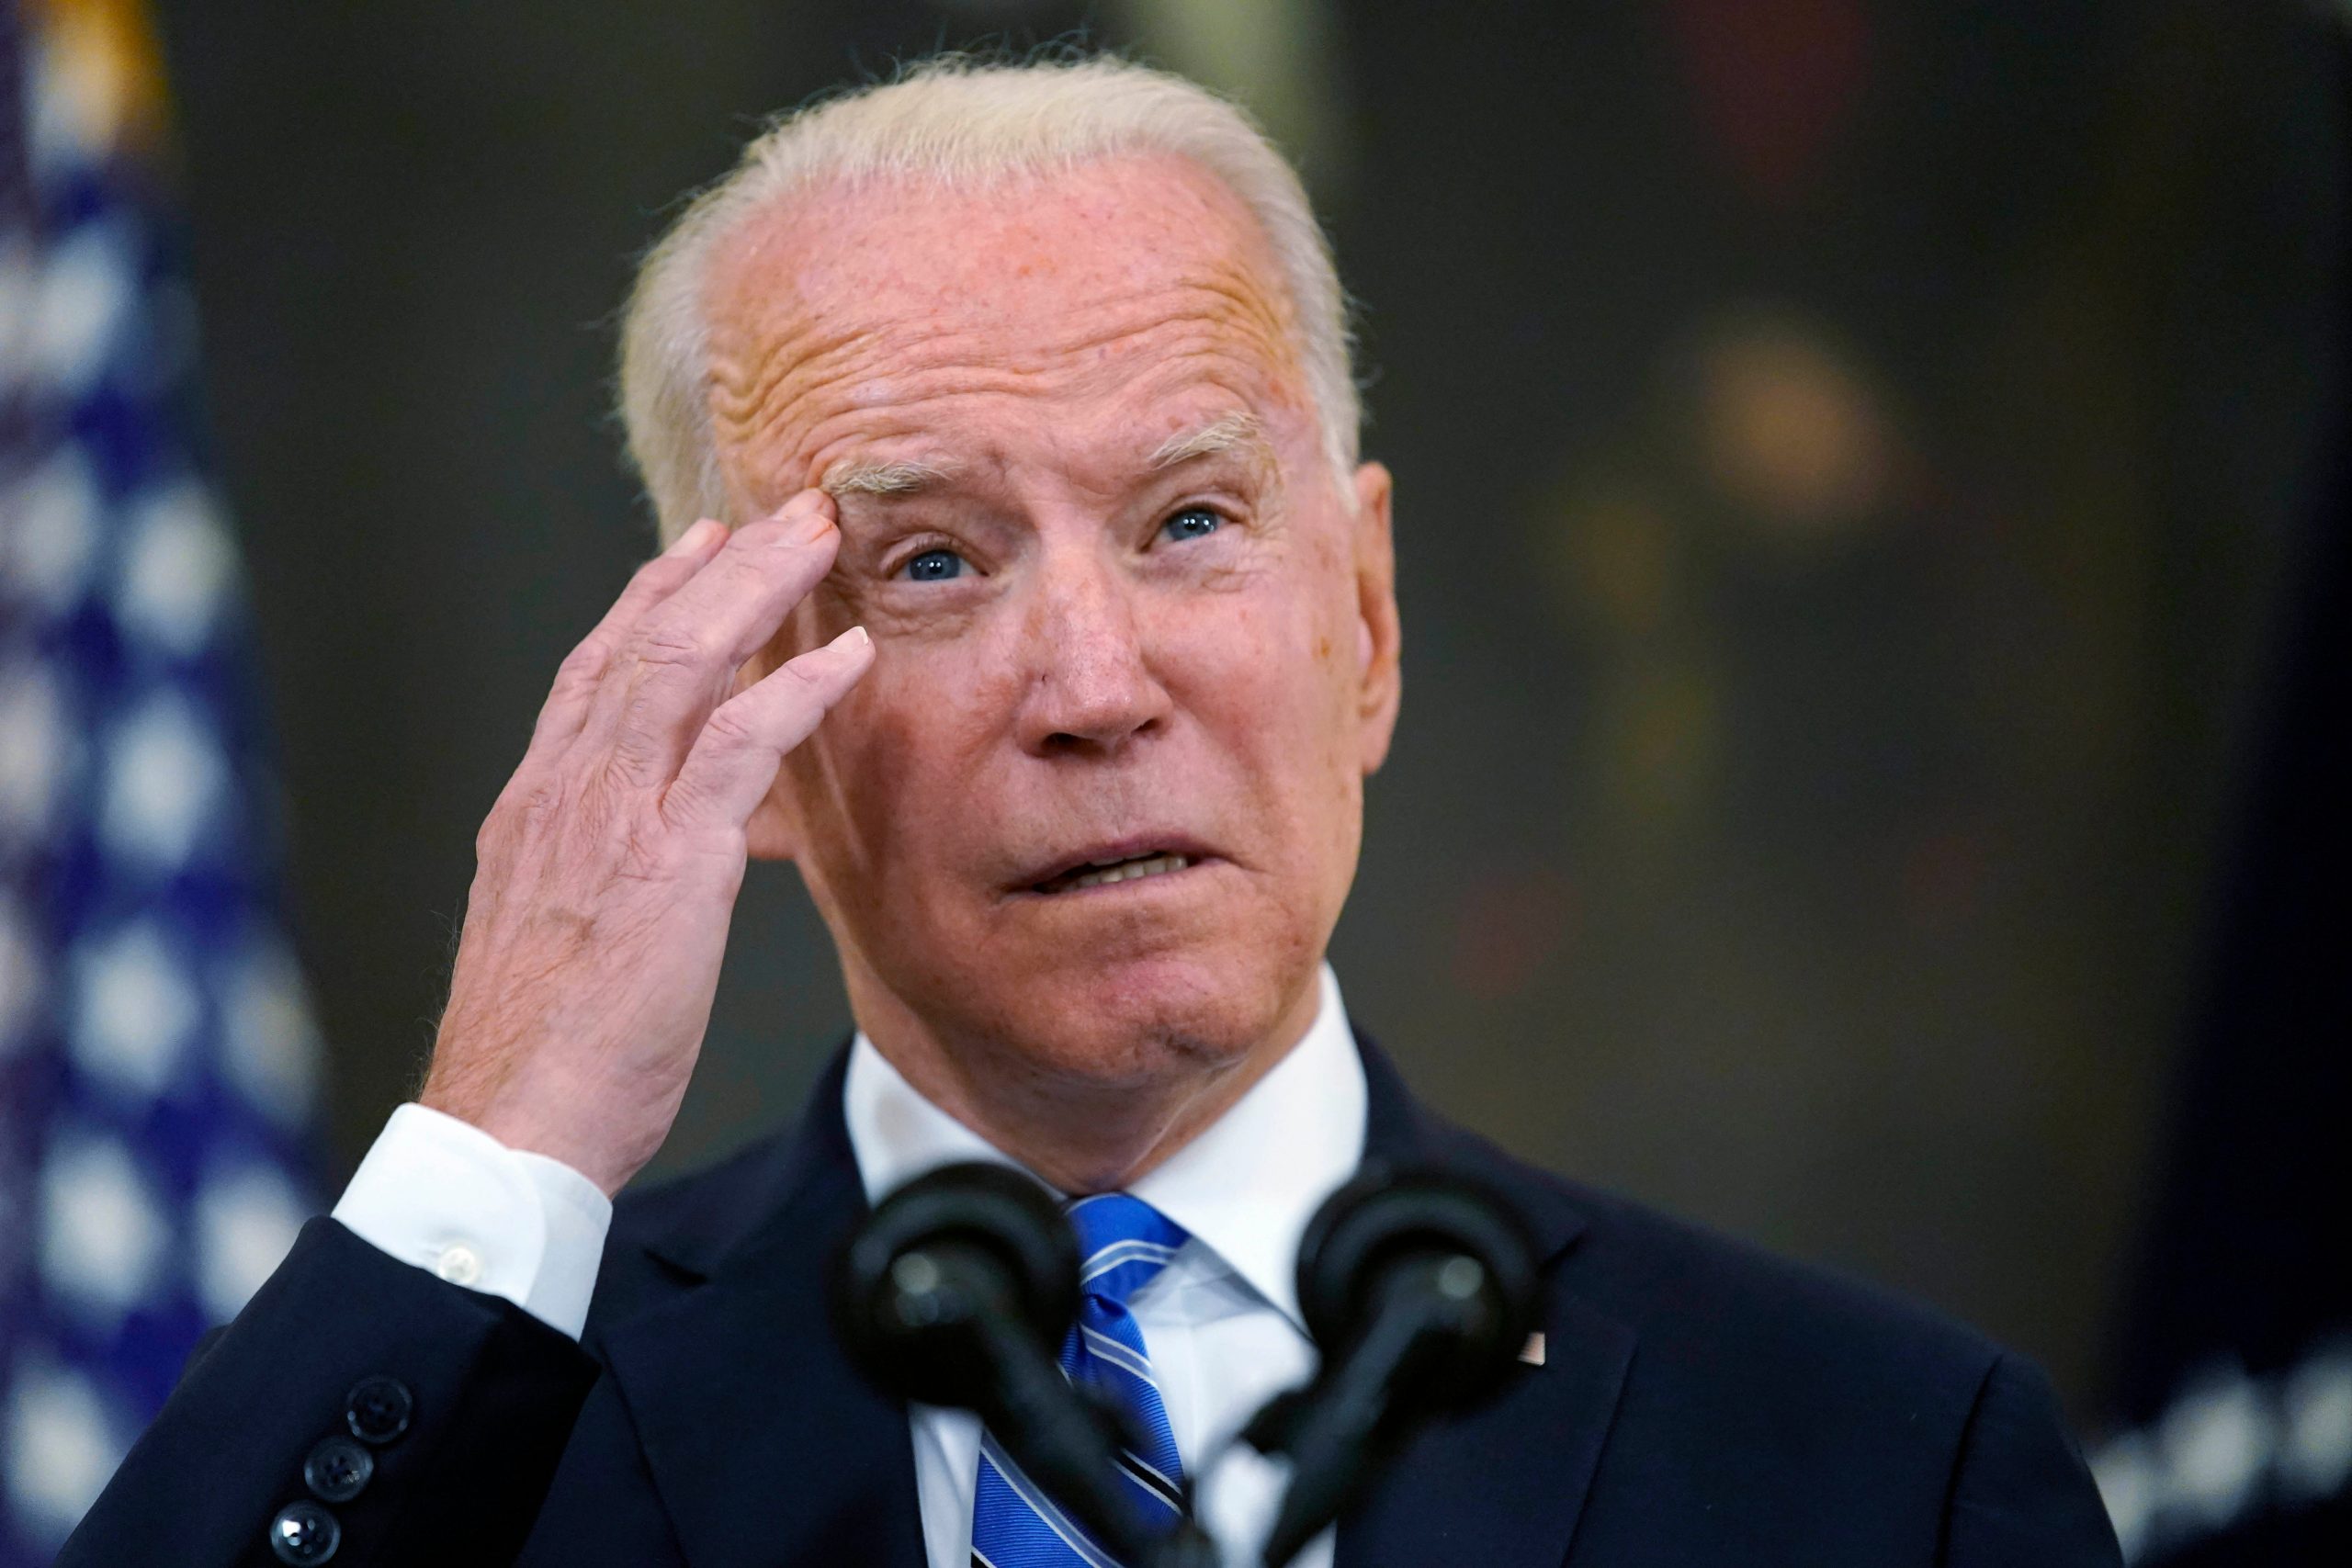 President Joe Biden assures US inflation is expected to be temporary